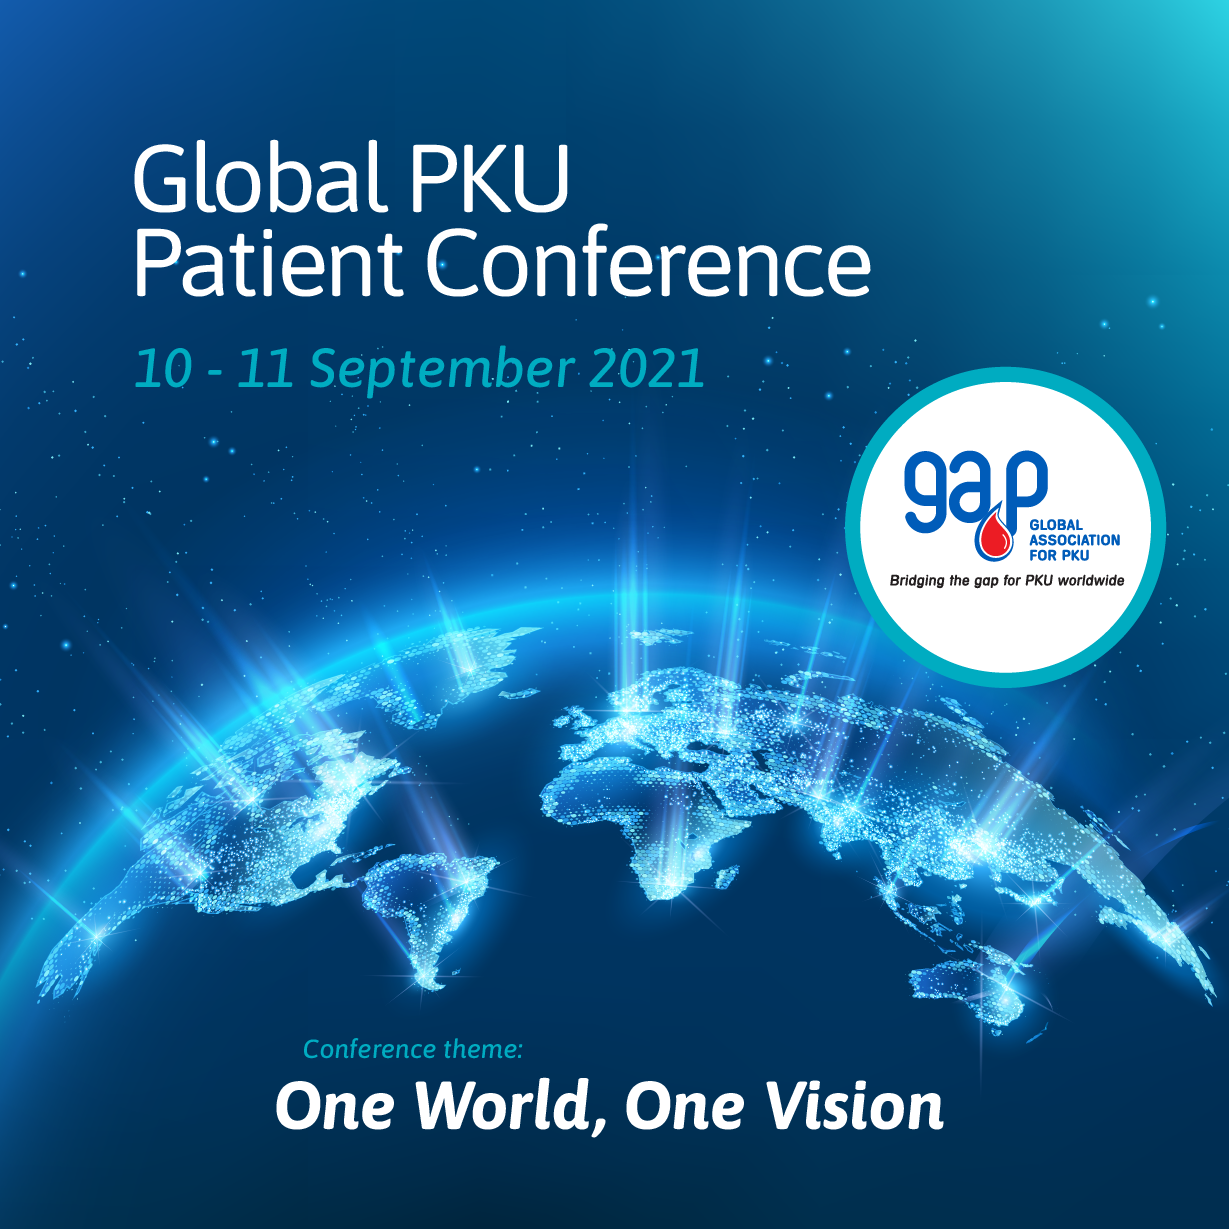 Global PKU Patient Conference